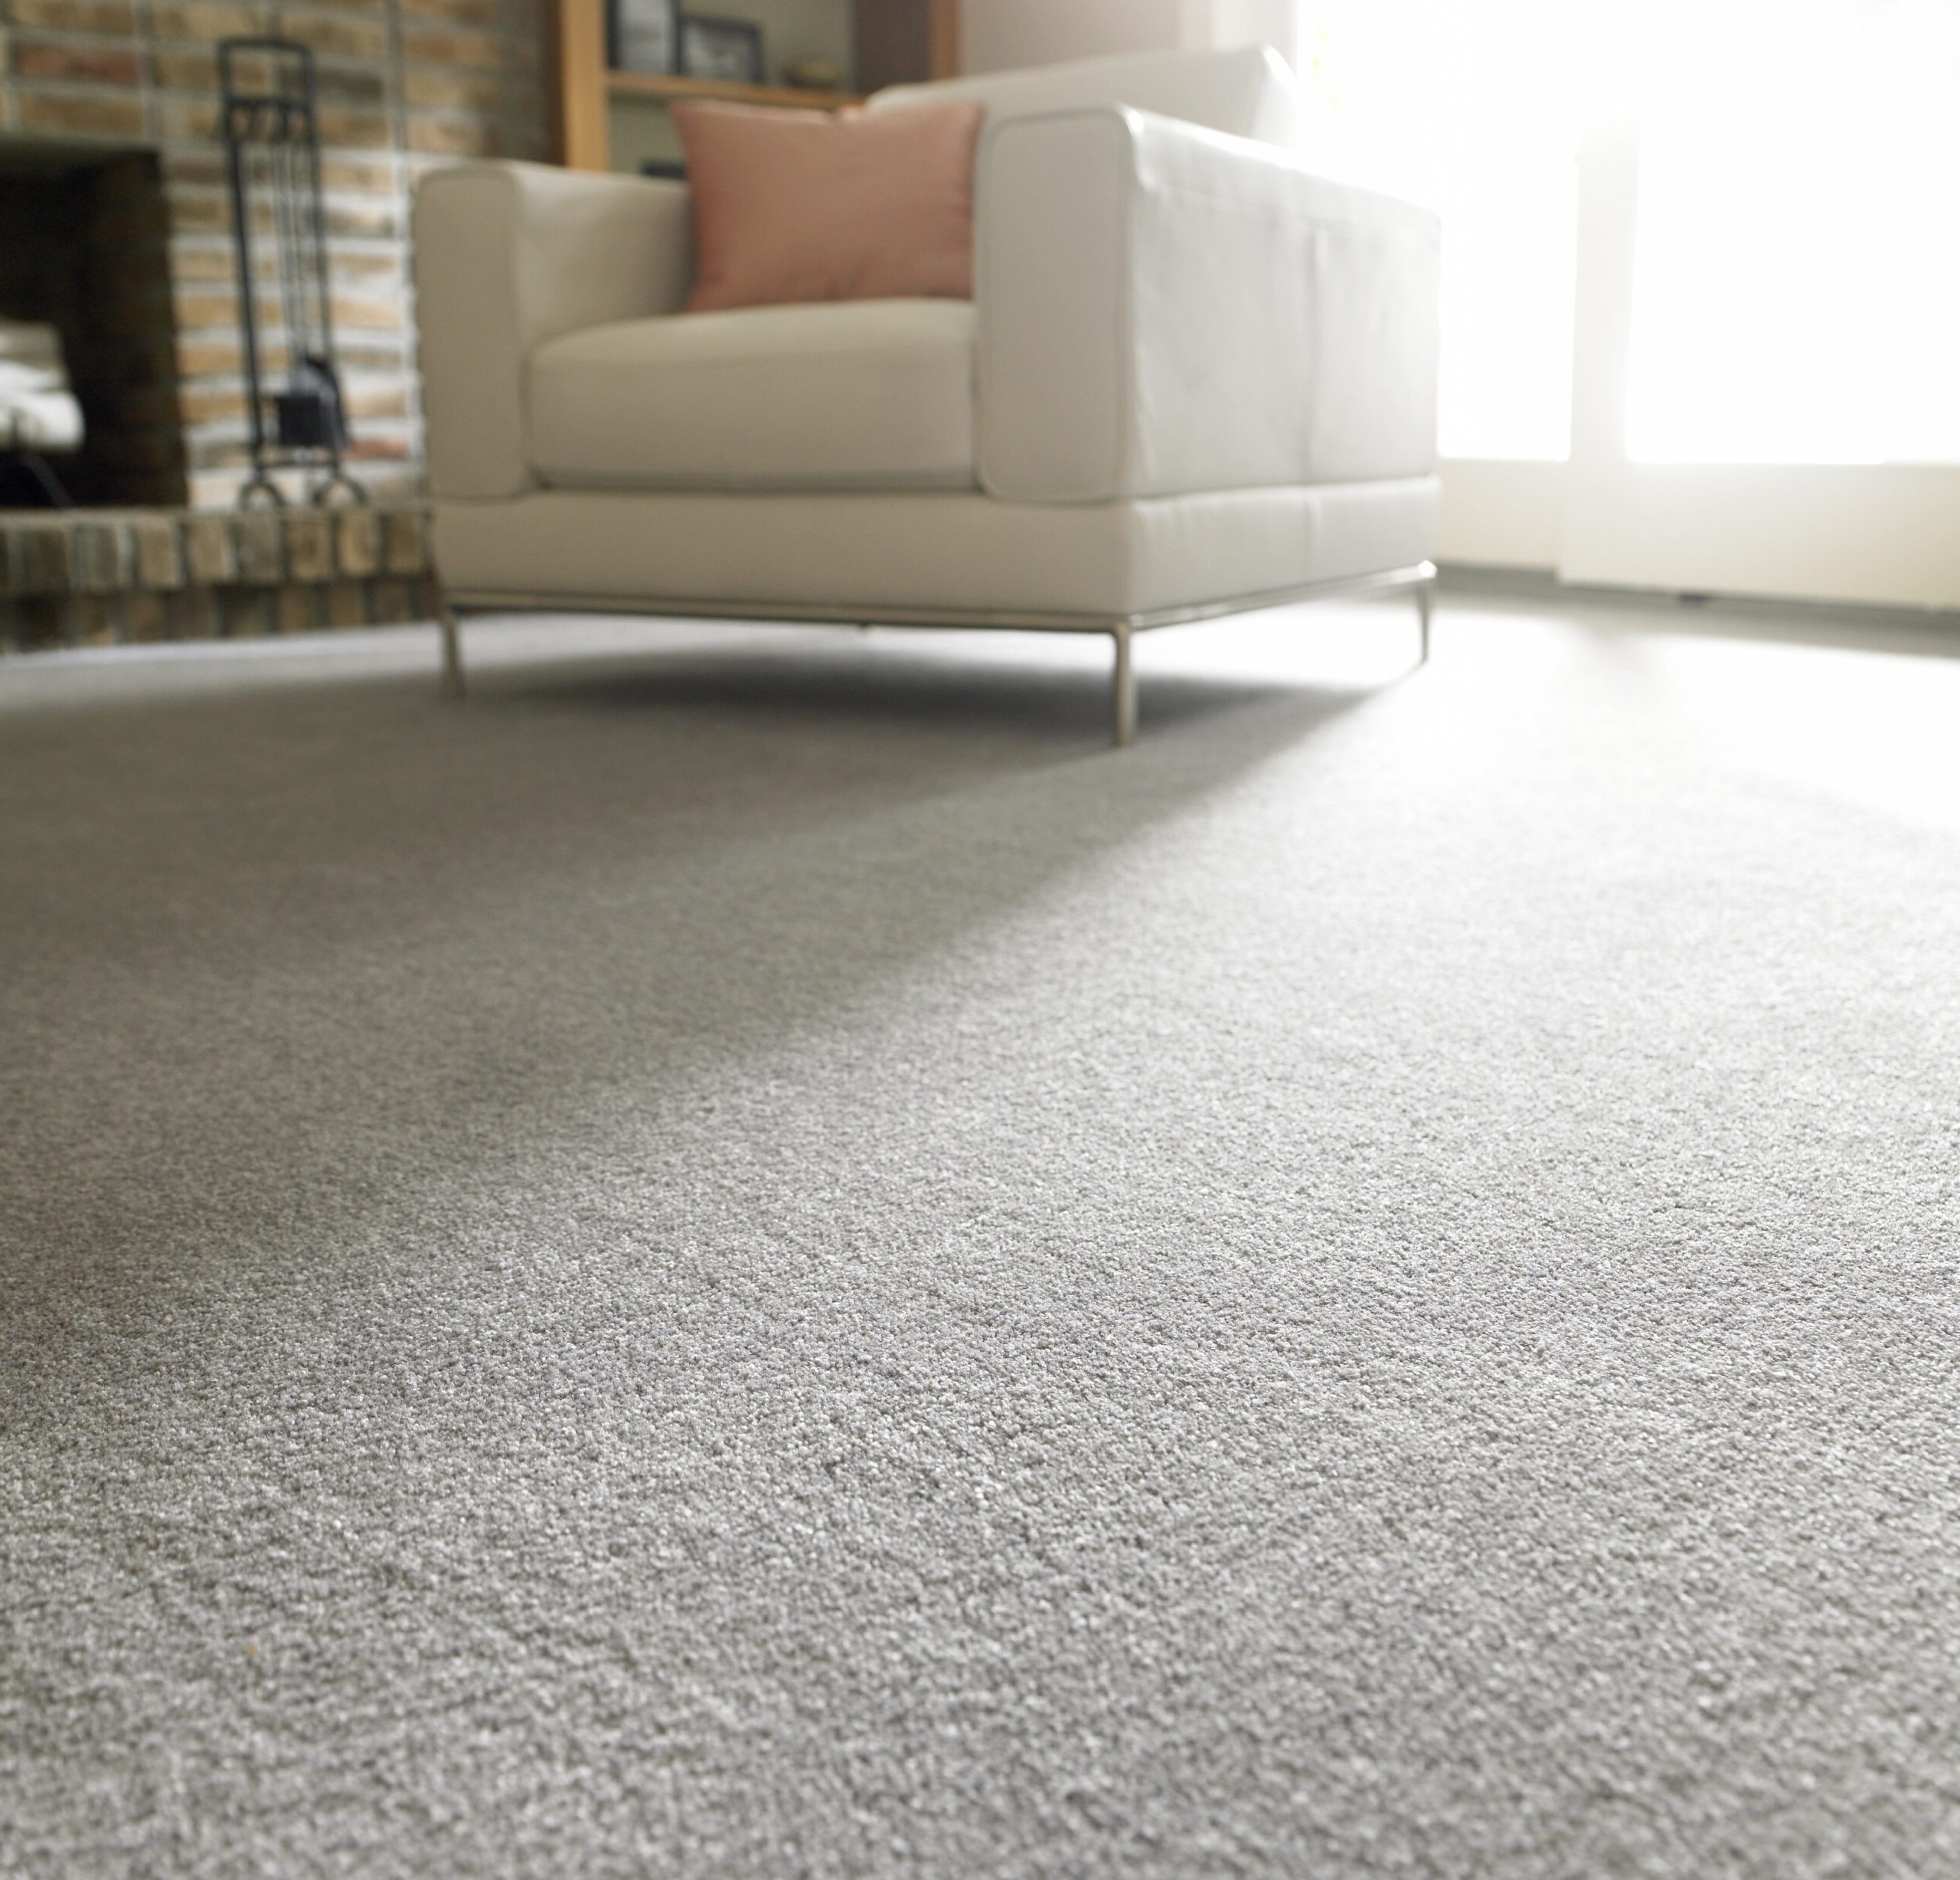 Why Plush Carpeting Is the Perfect Choice for Your Home